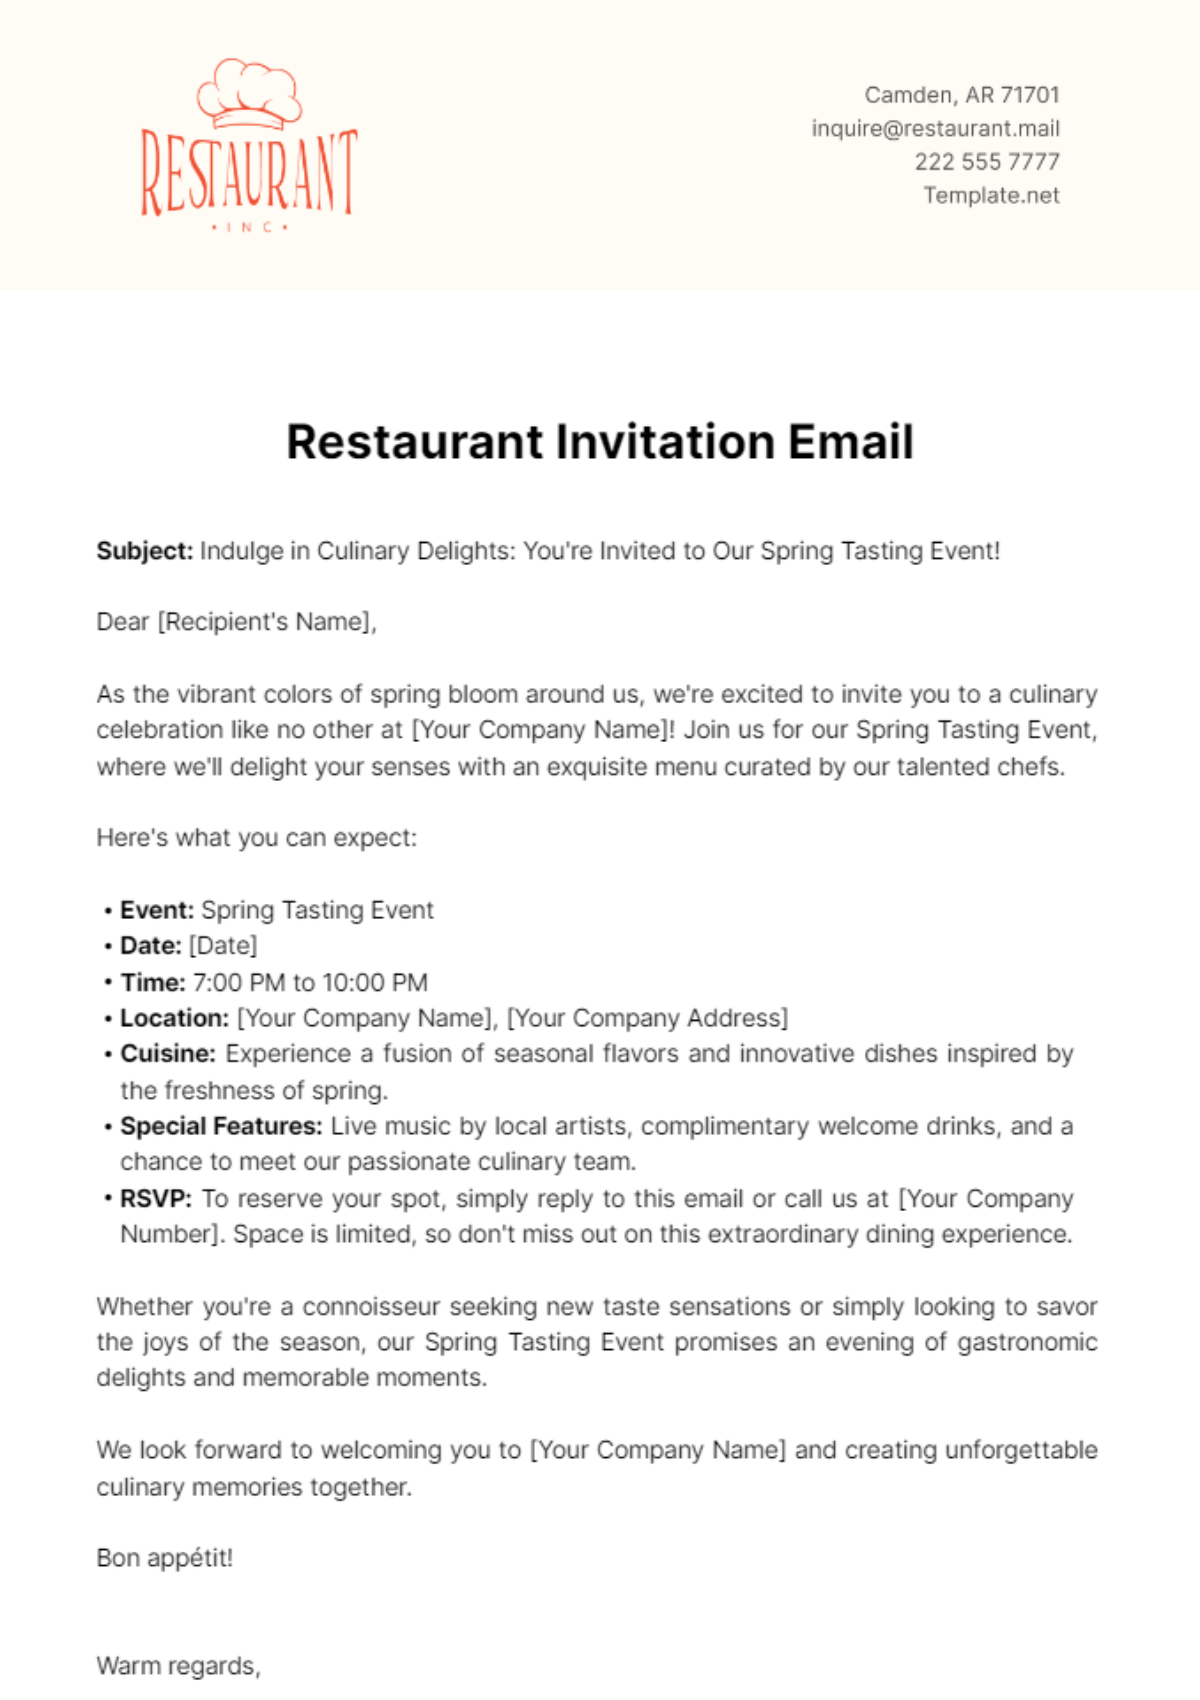 Free Restaurant Invitation Email Template